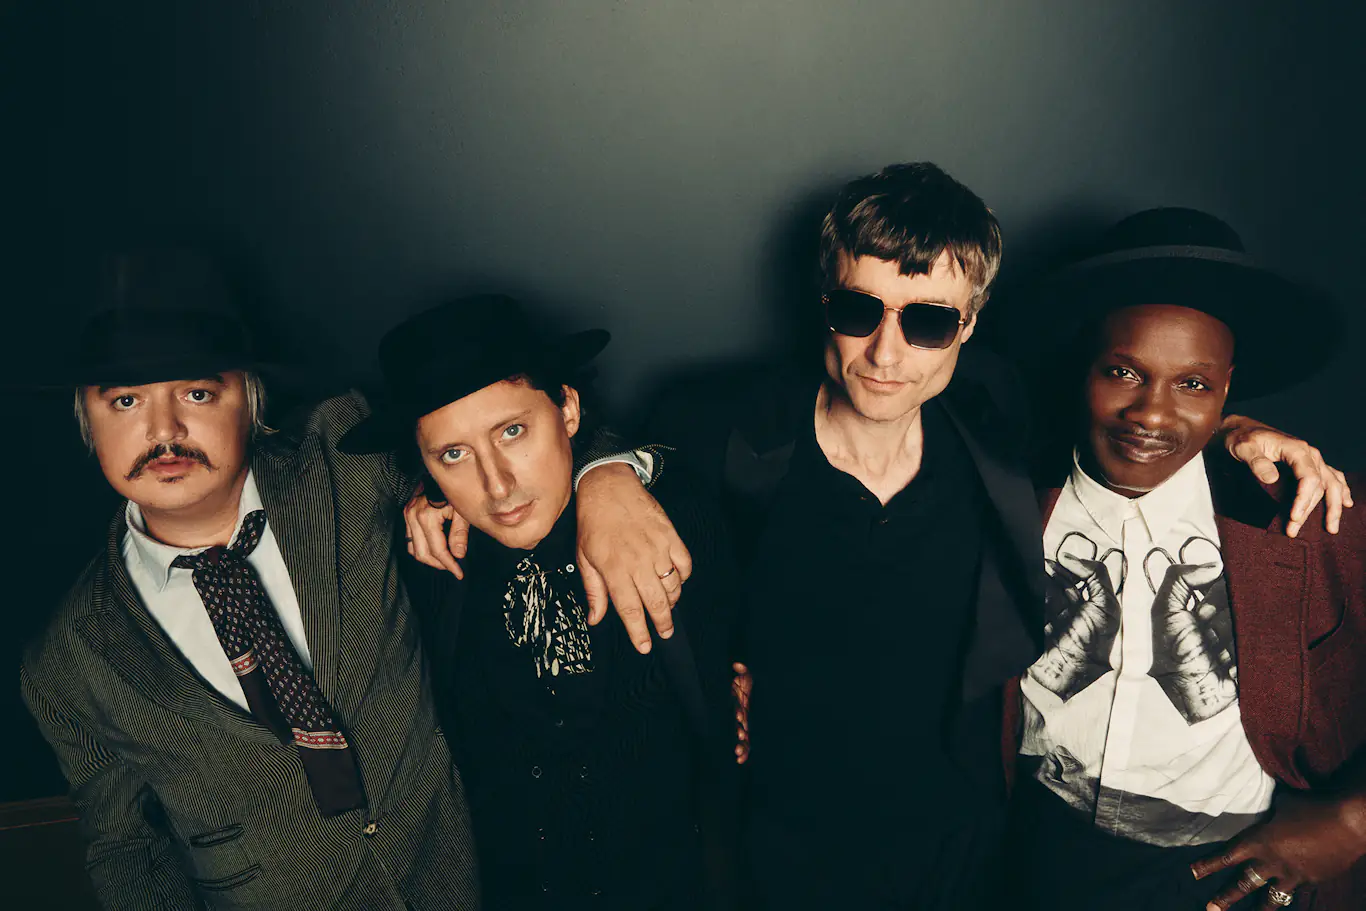 THE LIBERTINES share video for new single ‘Night Of The Hunter’